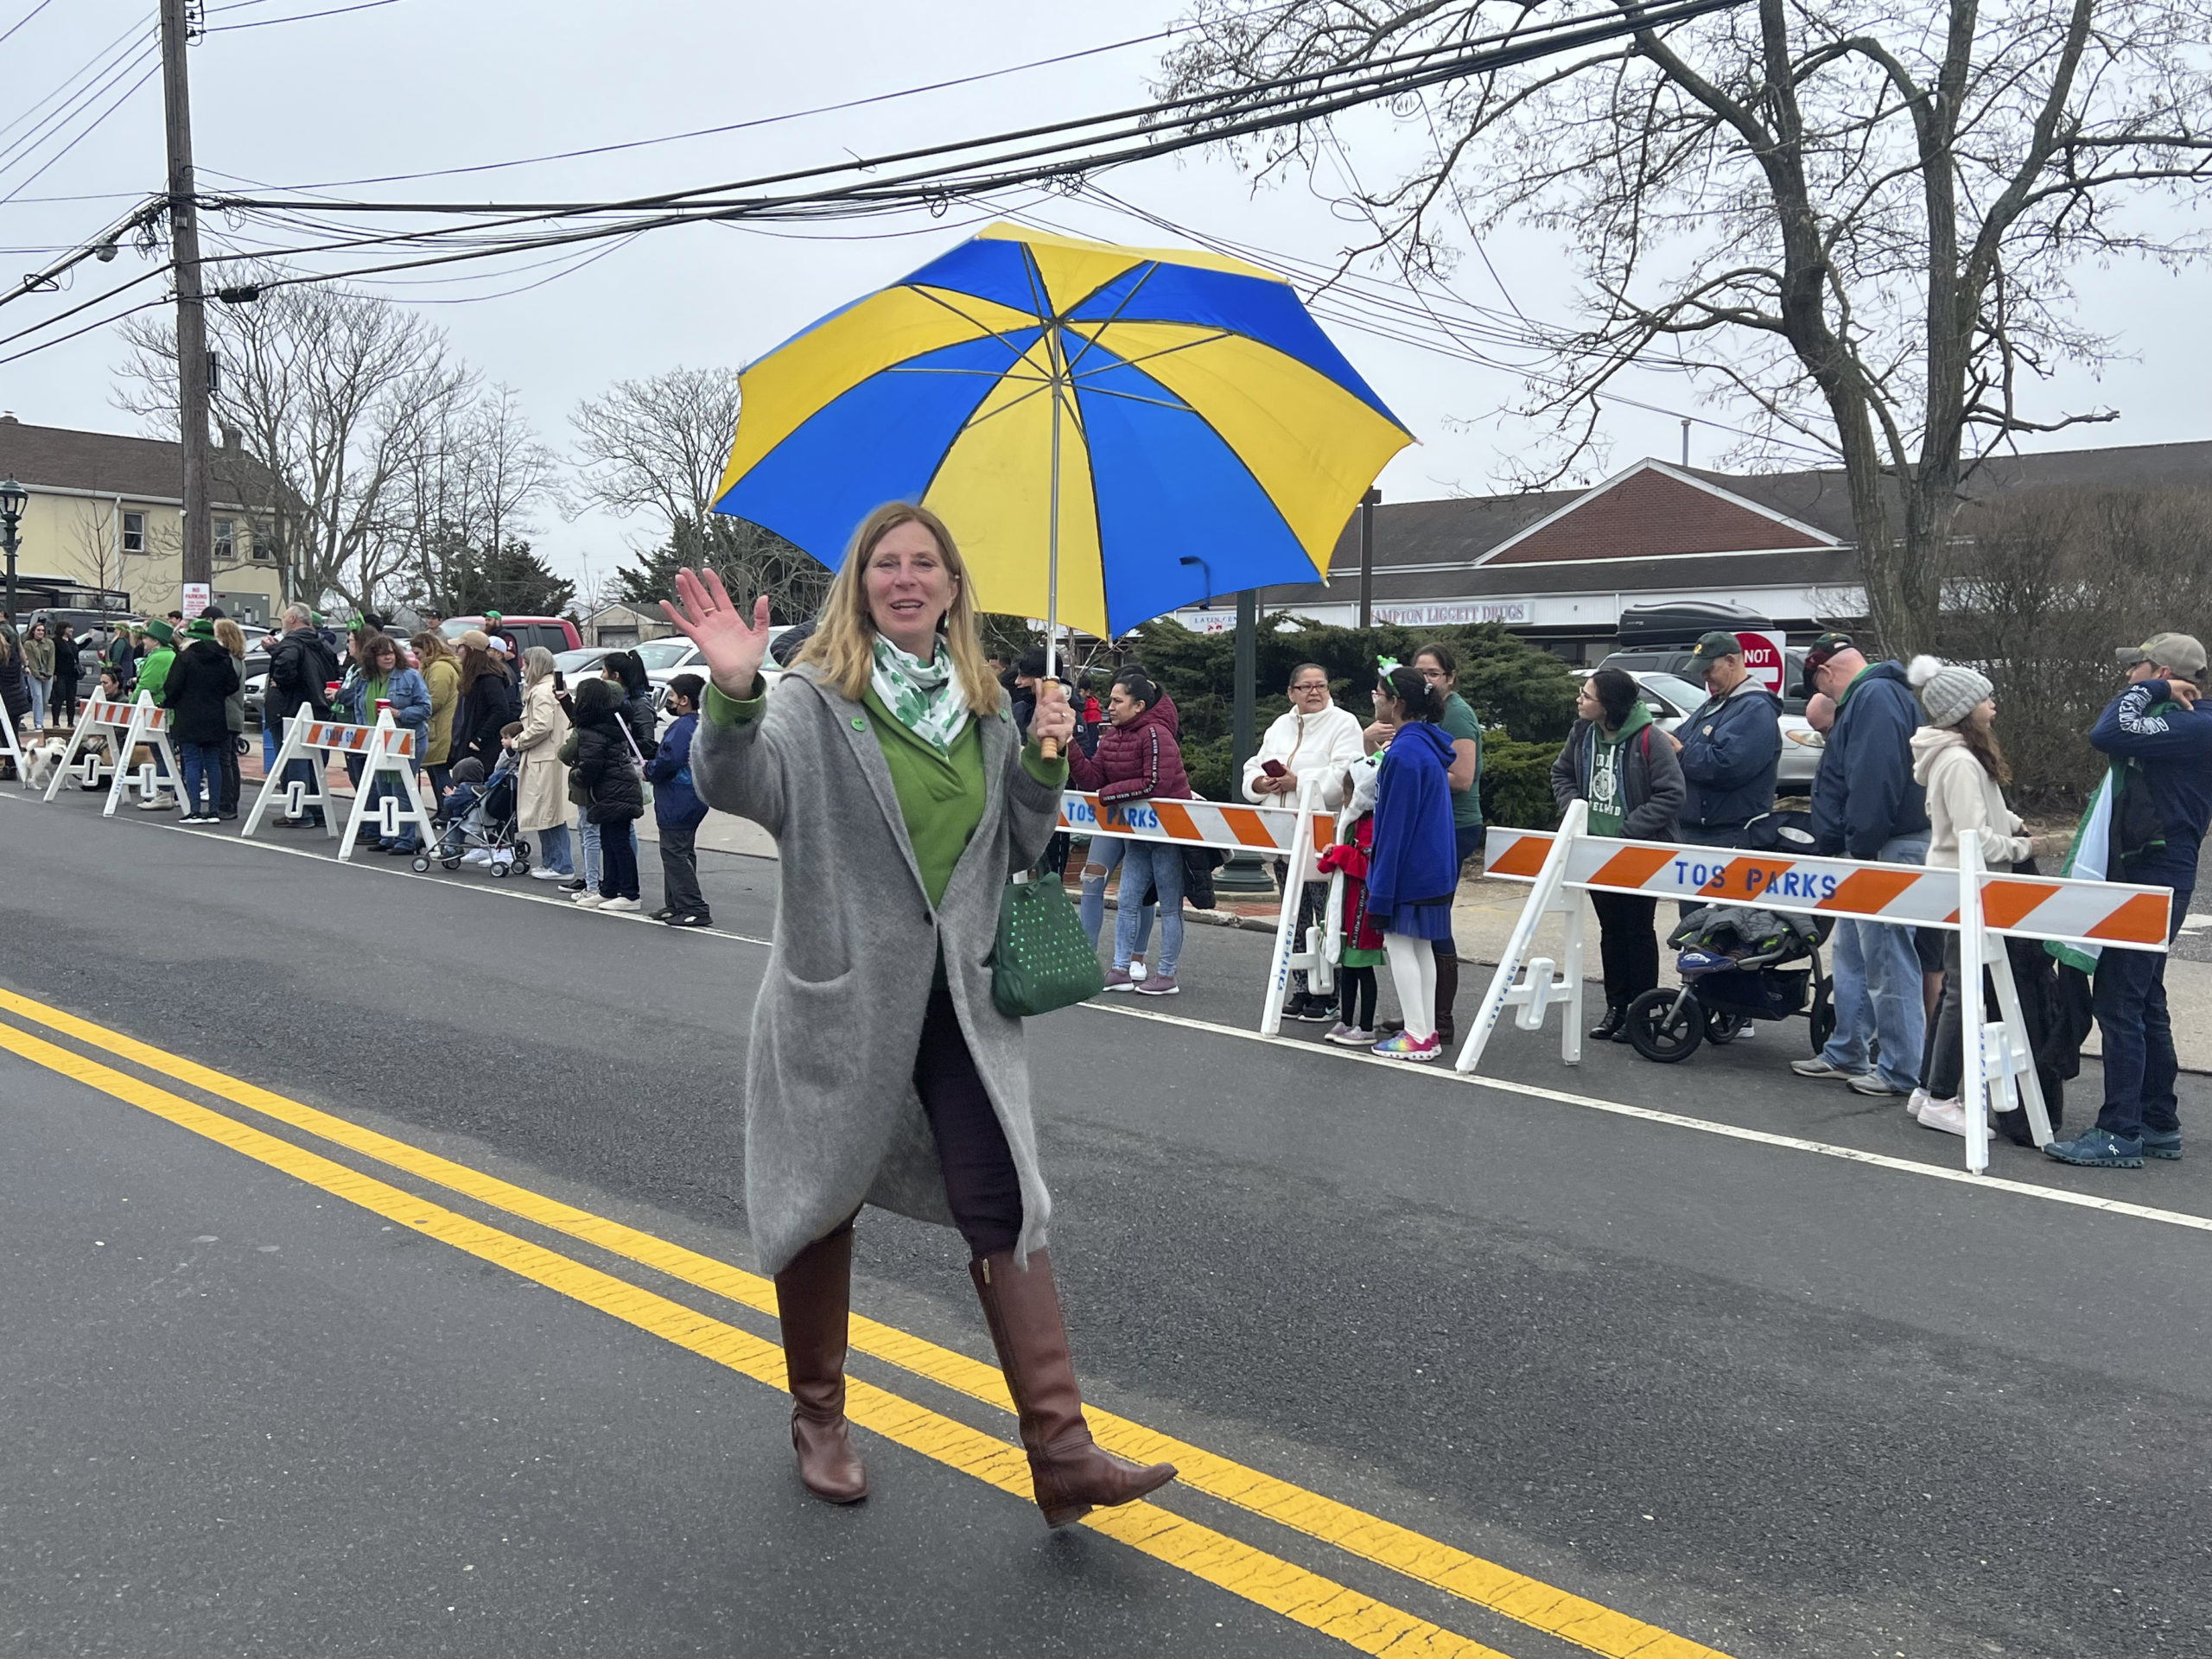 Judge Barbara Wilson showing her support for Ukraine at the Hampton Bays St. Patrick's Day parade on March 19.  DANA SHAW